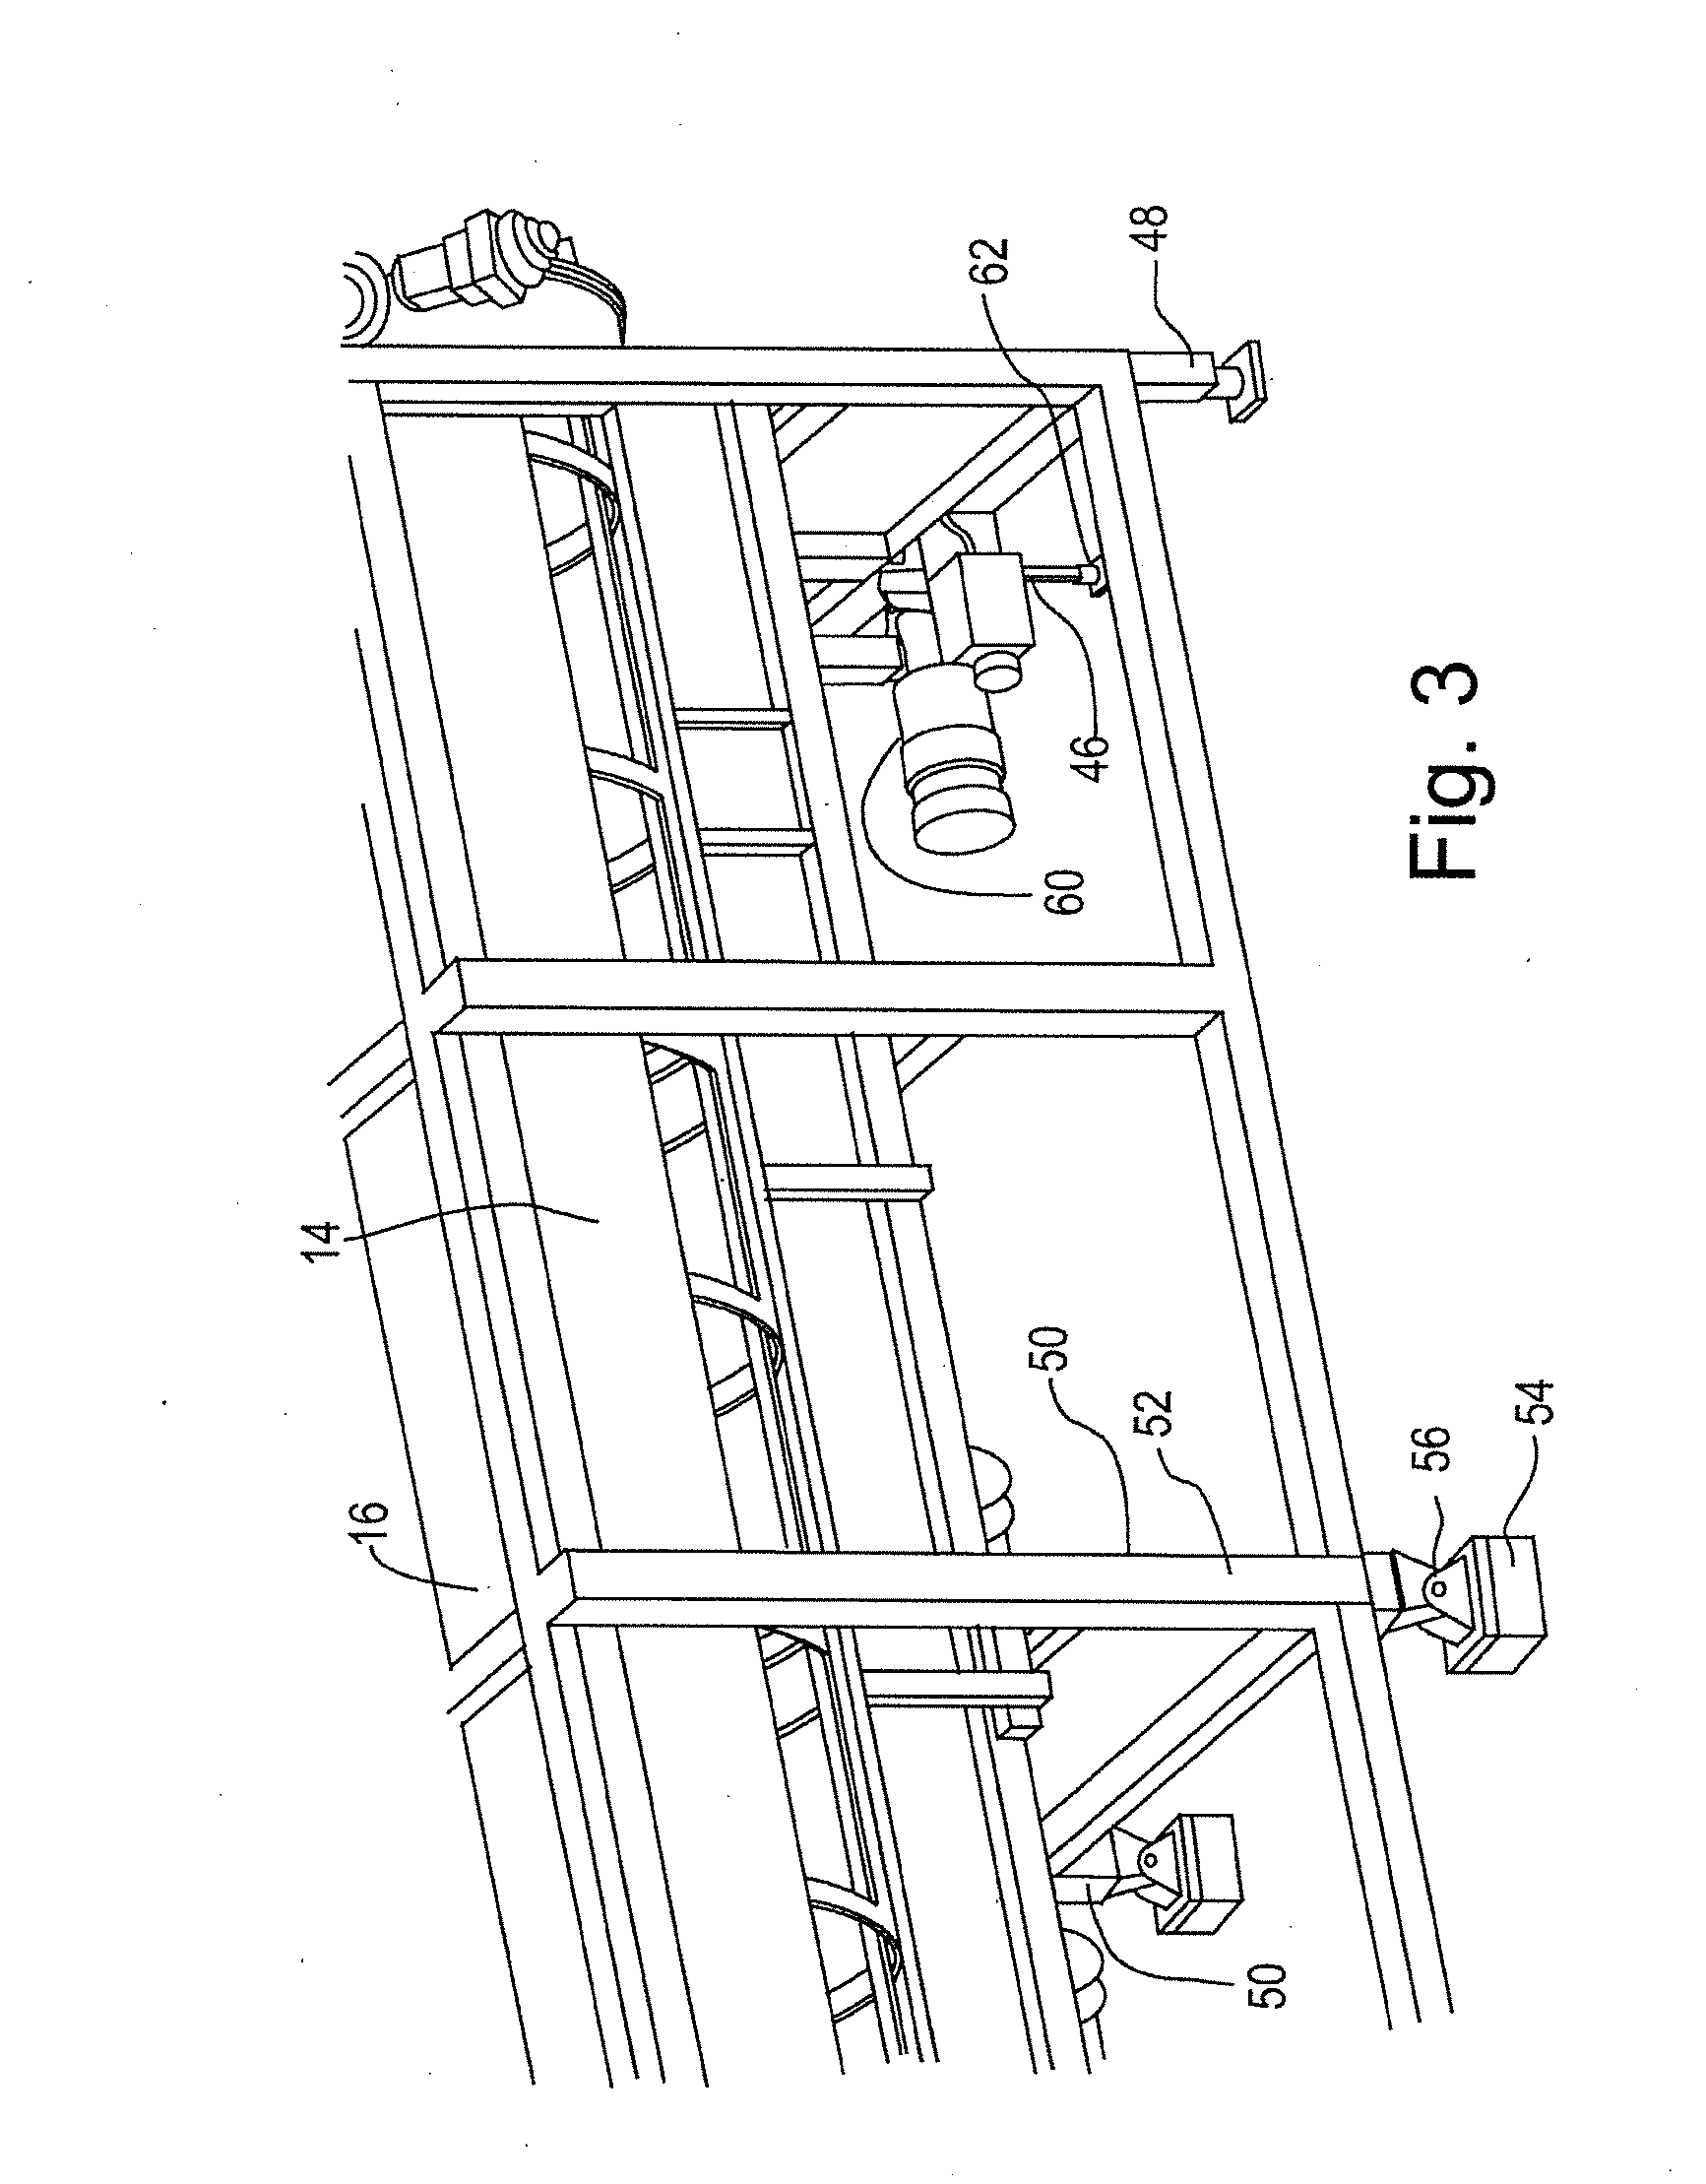 System and method for coating bulk articles